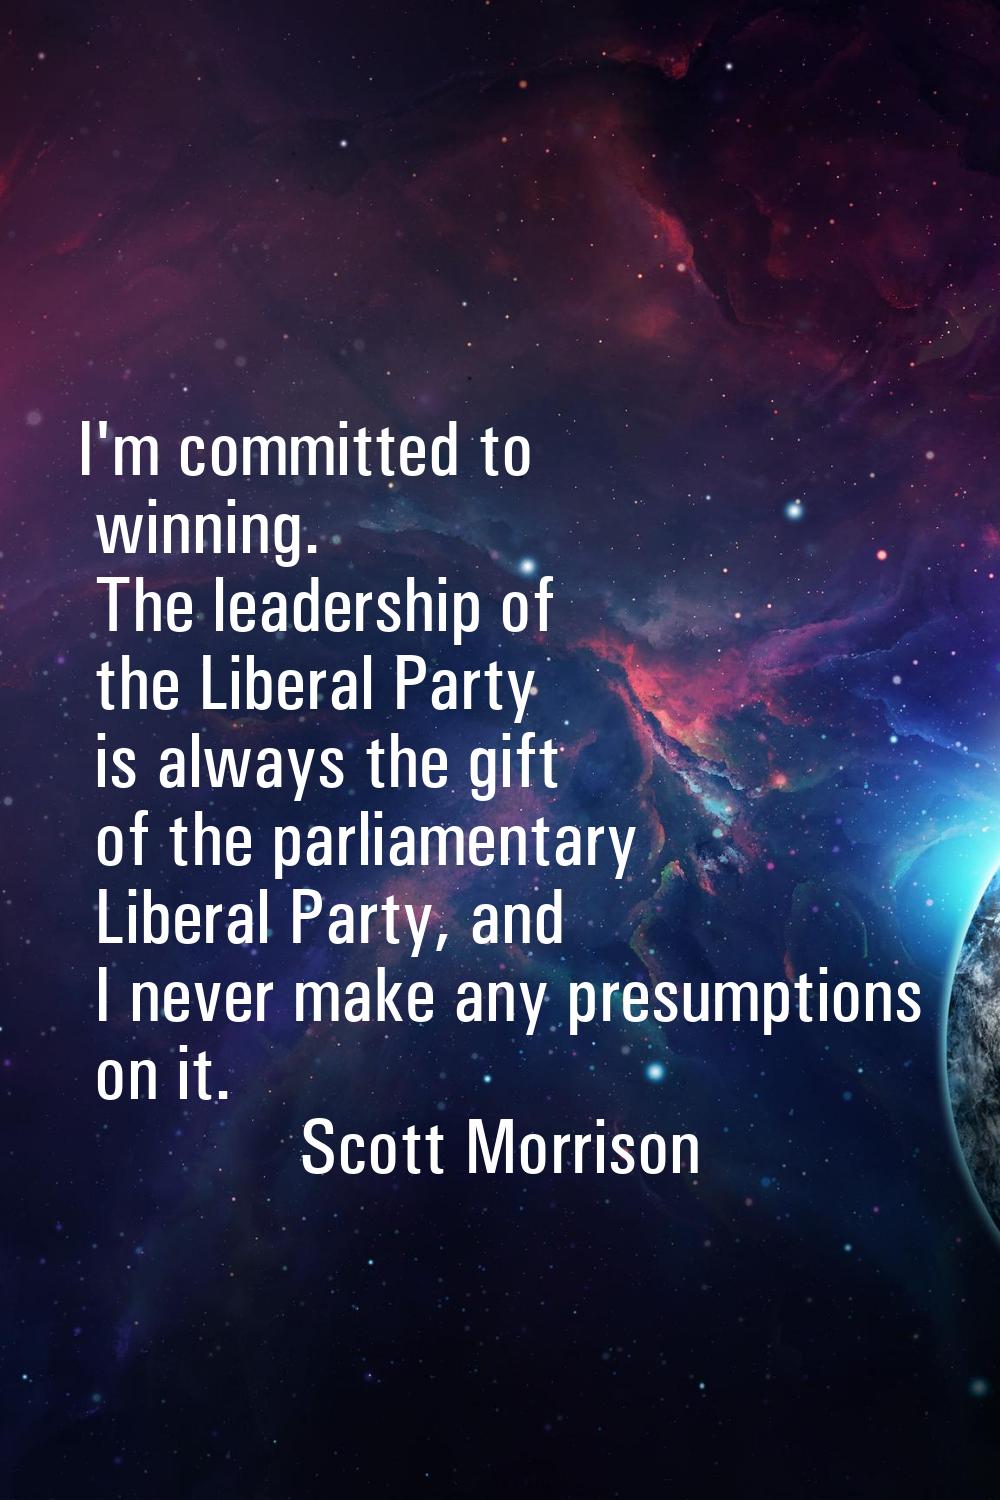 I'm committed to winning. The leadership of the Liberal Party is always the gift of the parliamenta